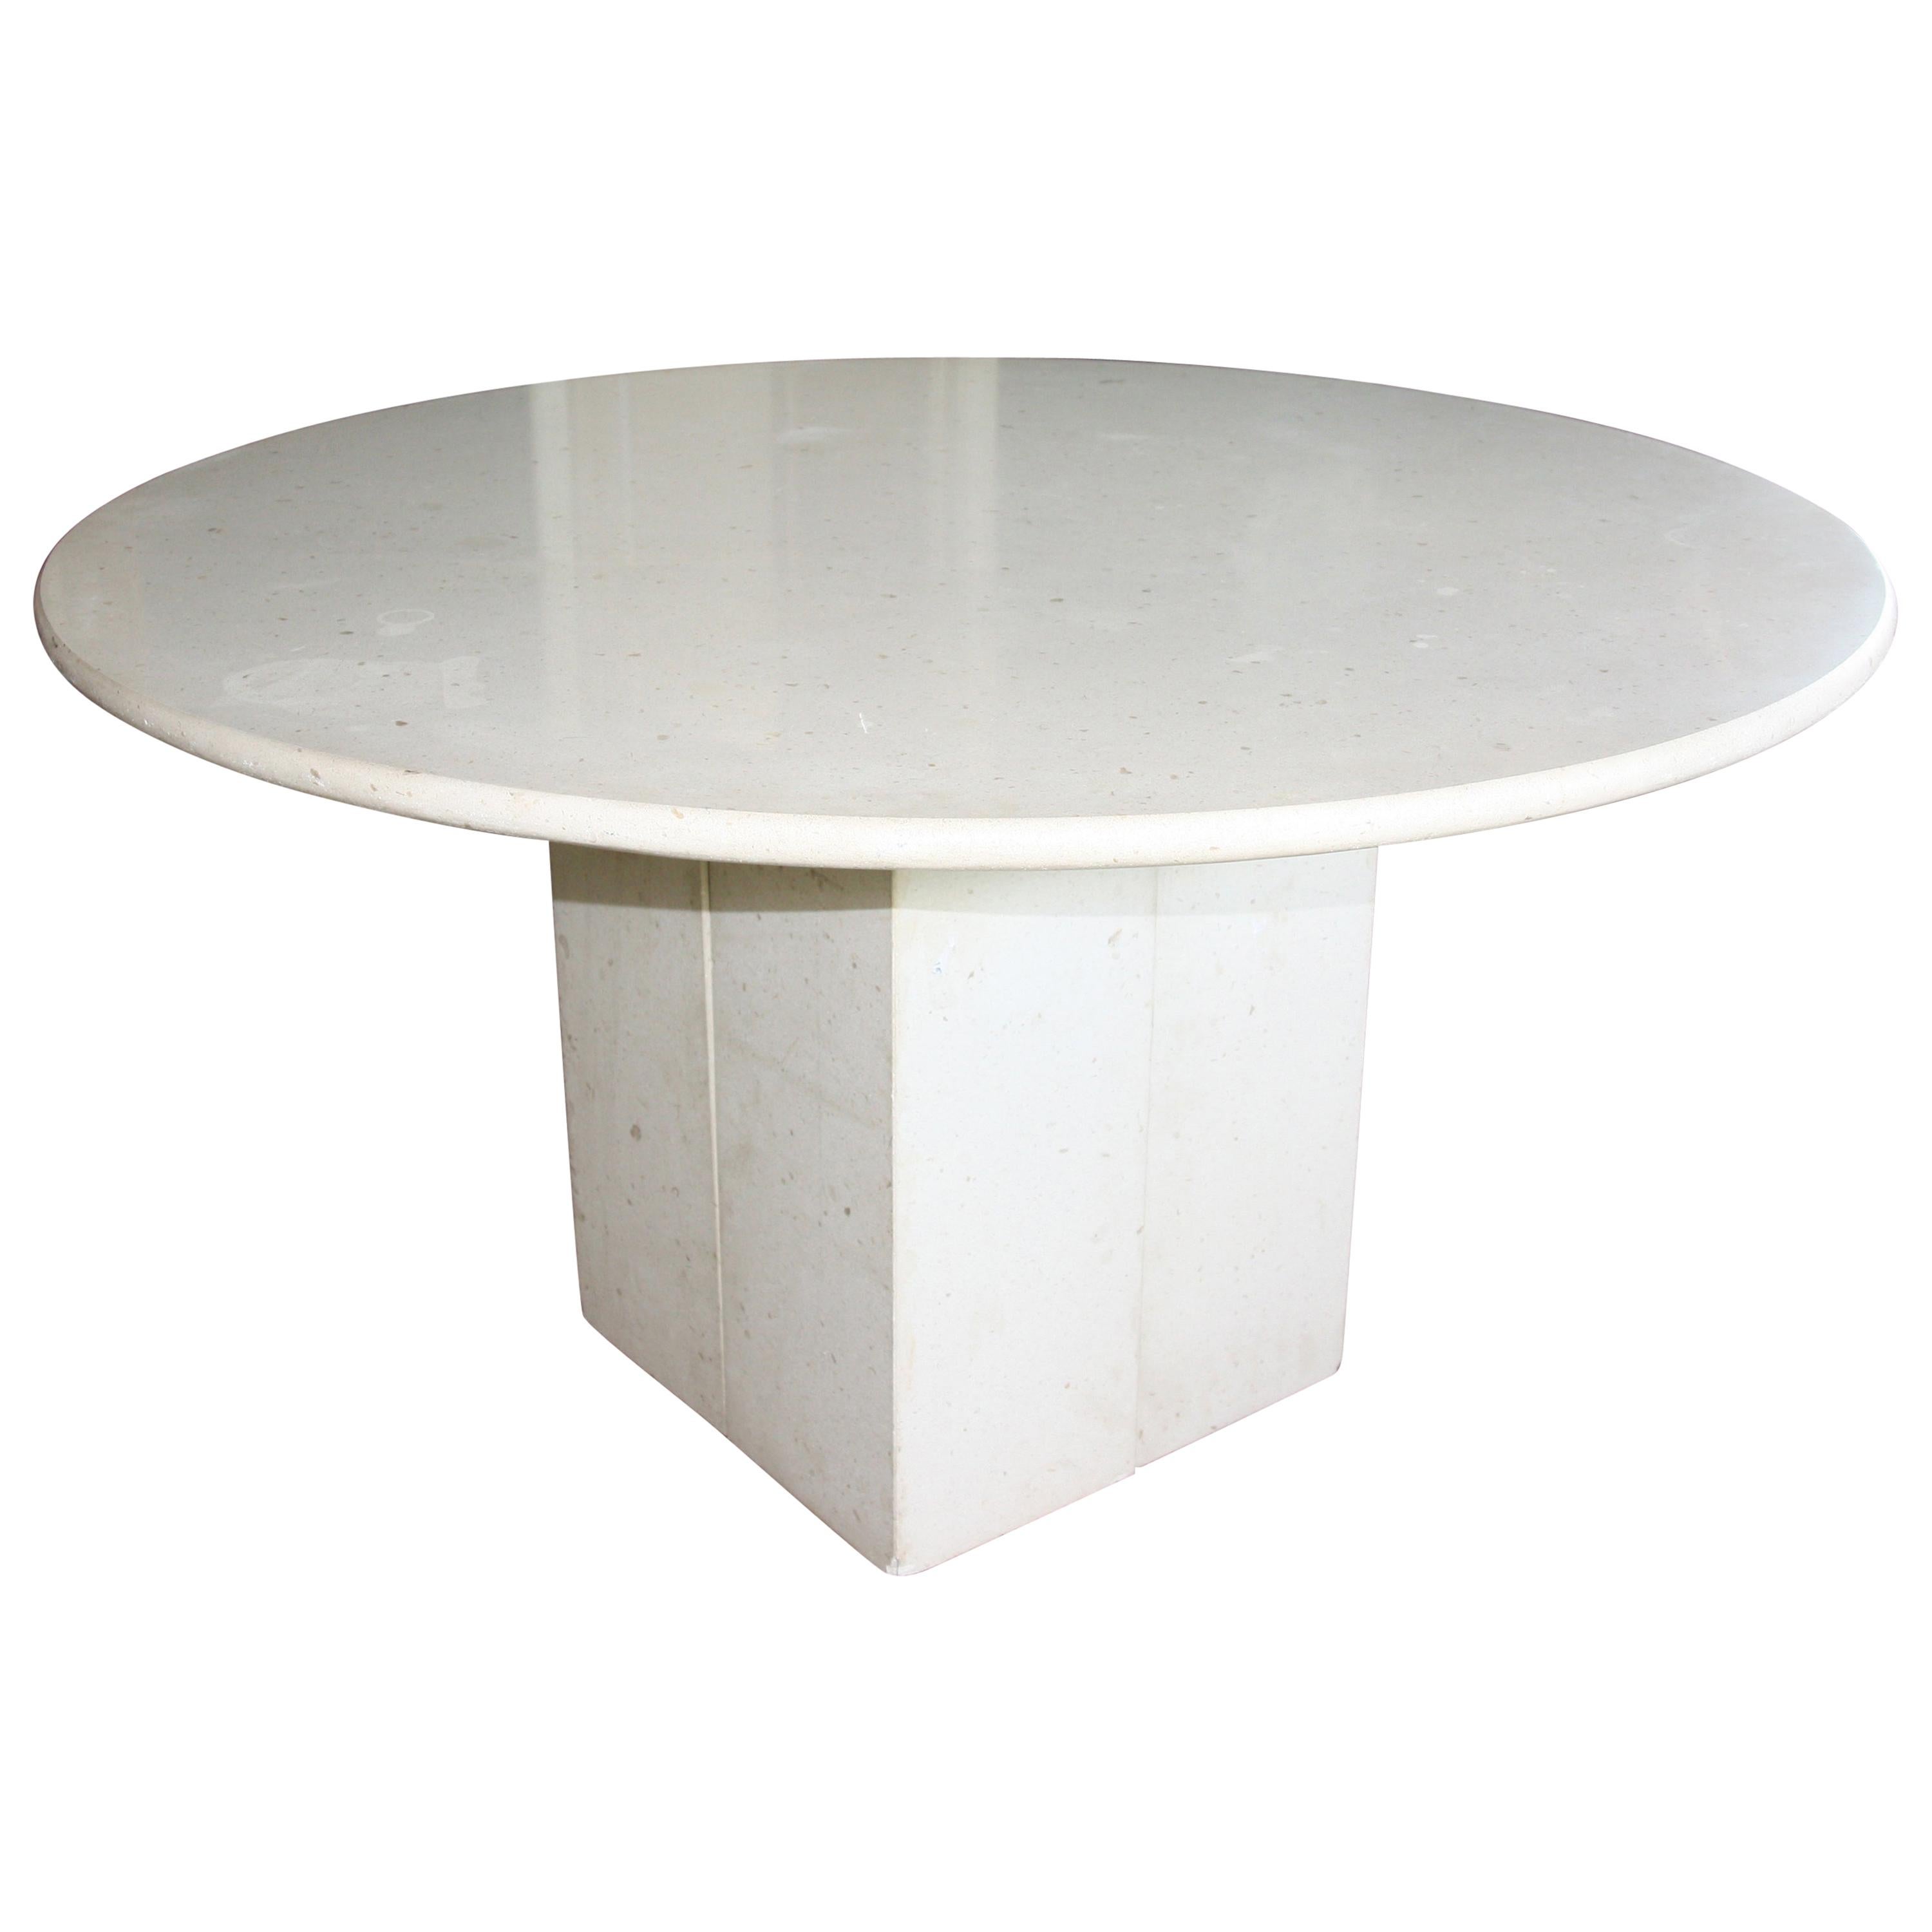 Circular Limestone Table With Modular Square Base For Sale